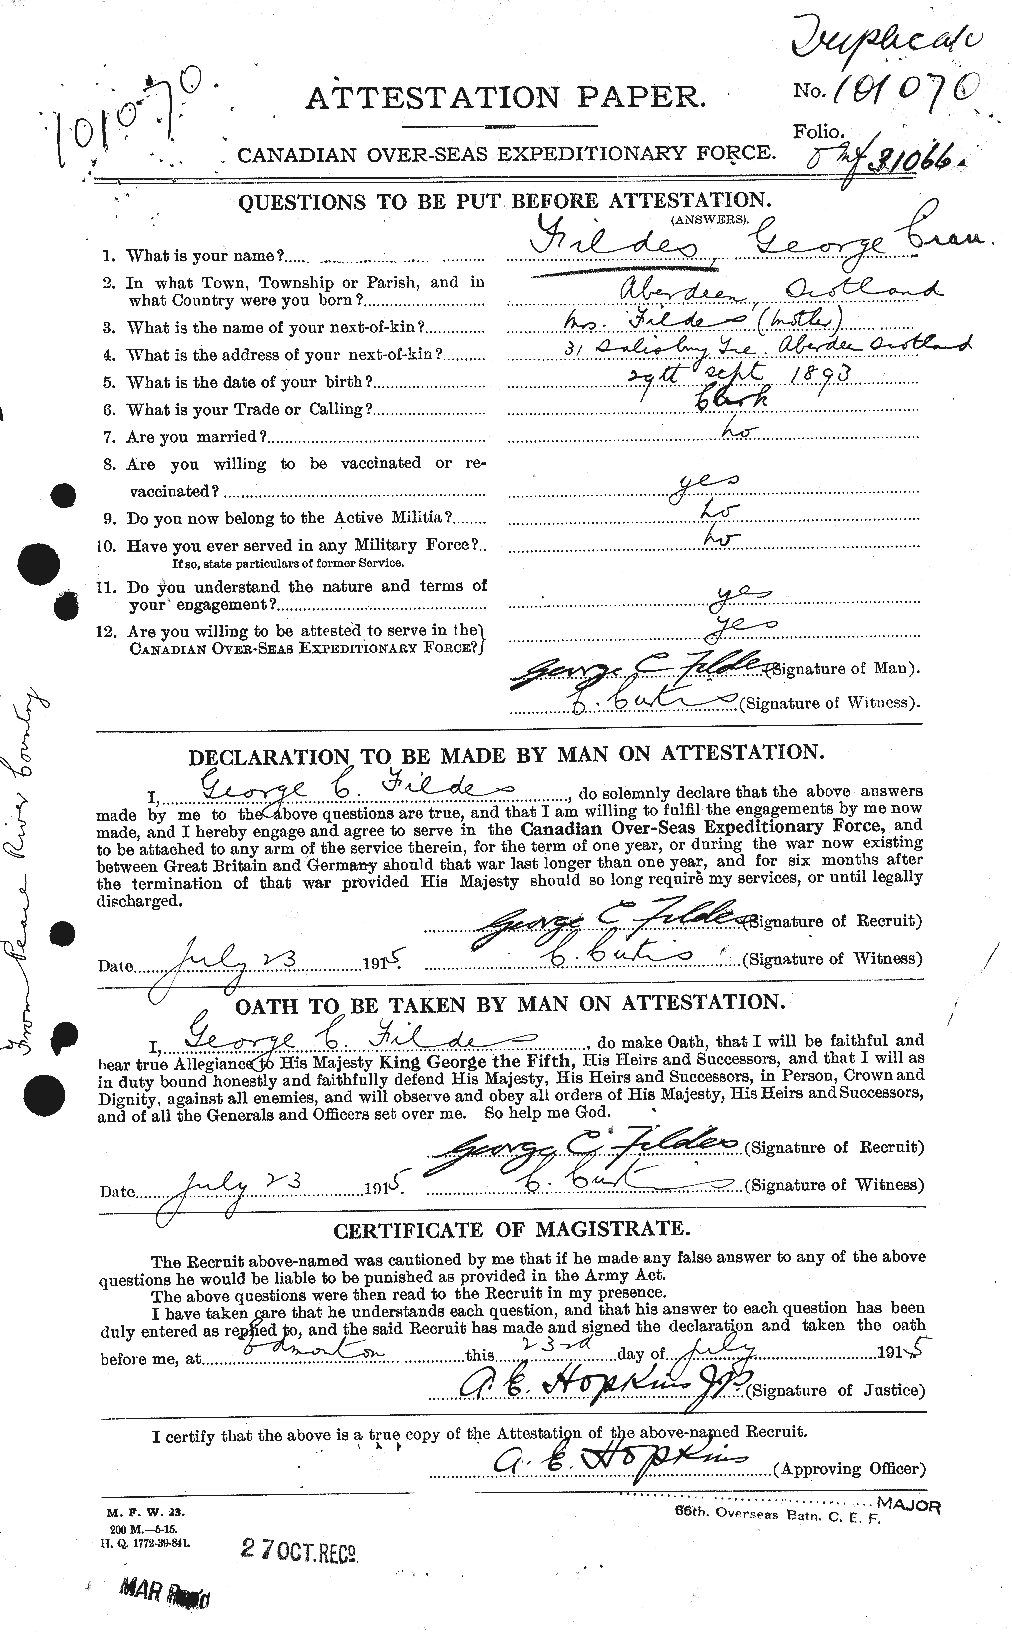 Personnel Records of the First World War - CEF 321102a